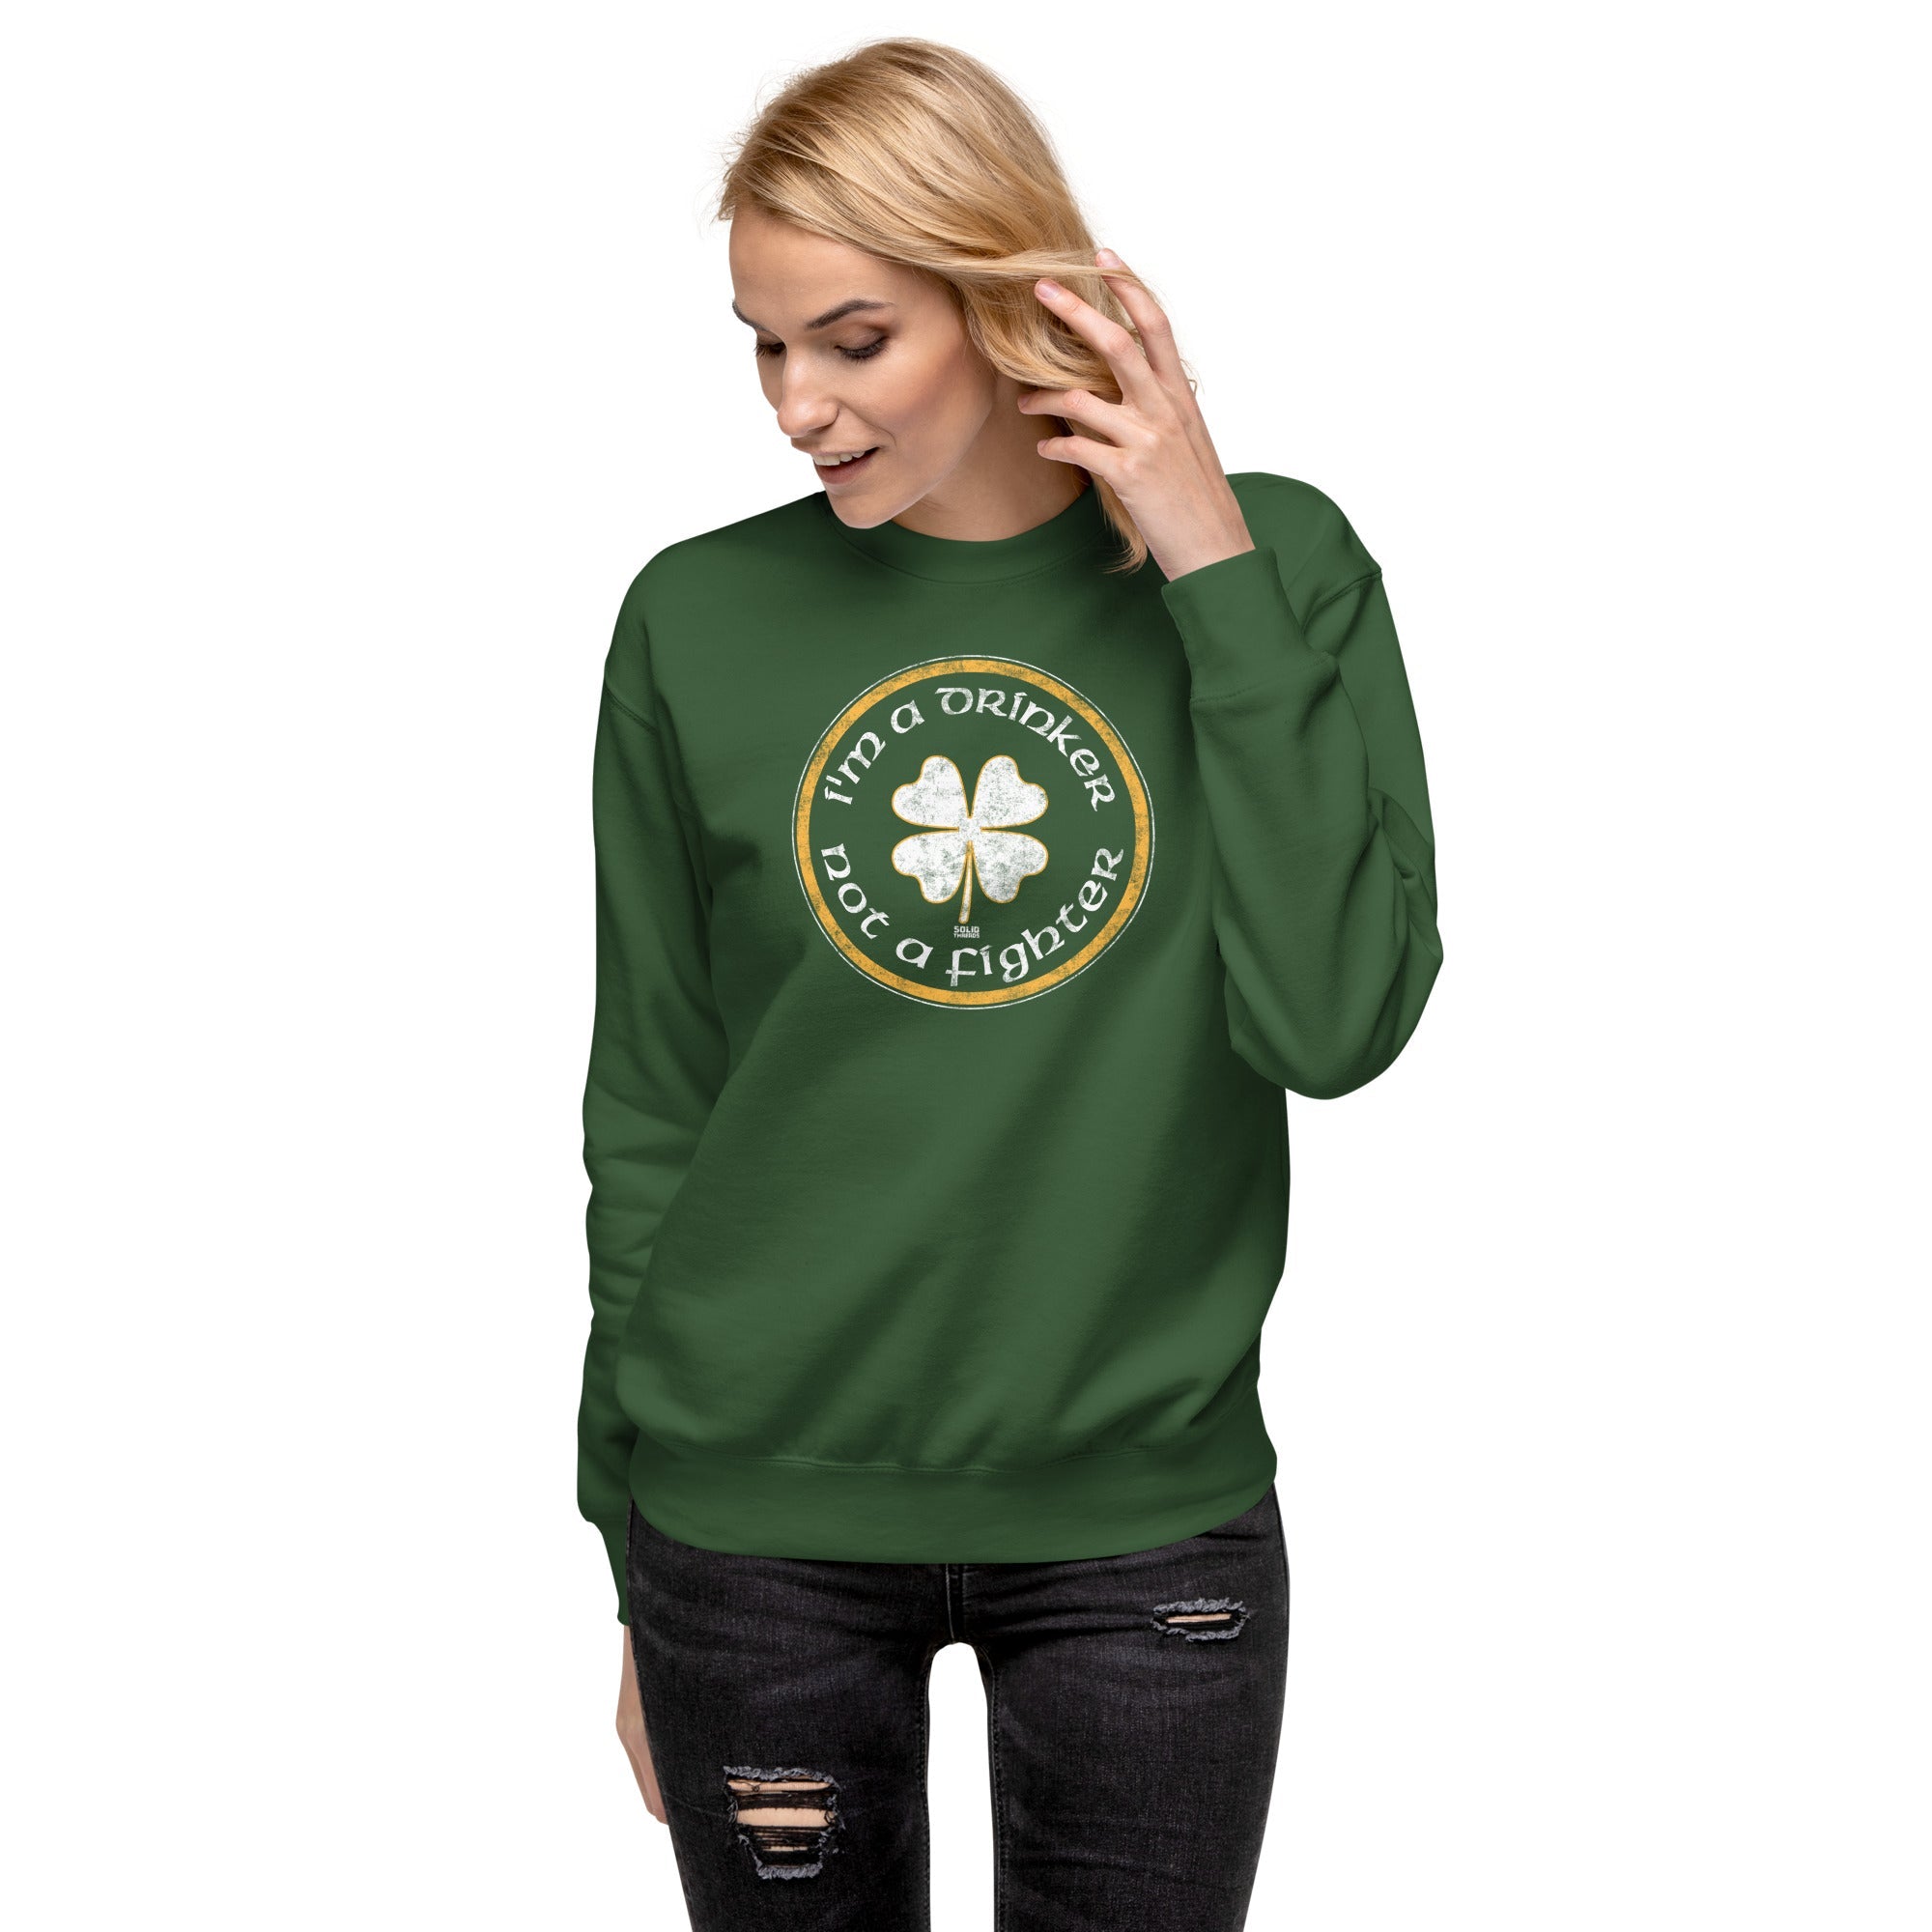 Men's I'm A Drinker Not A Fighter Vintage Classic Sweatshirt | Funny St Paddy's Fleece On Model | Solid Threads